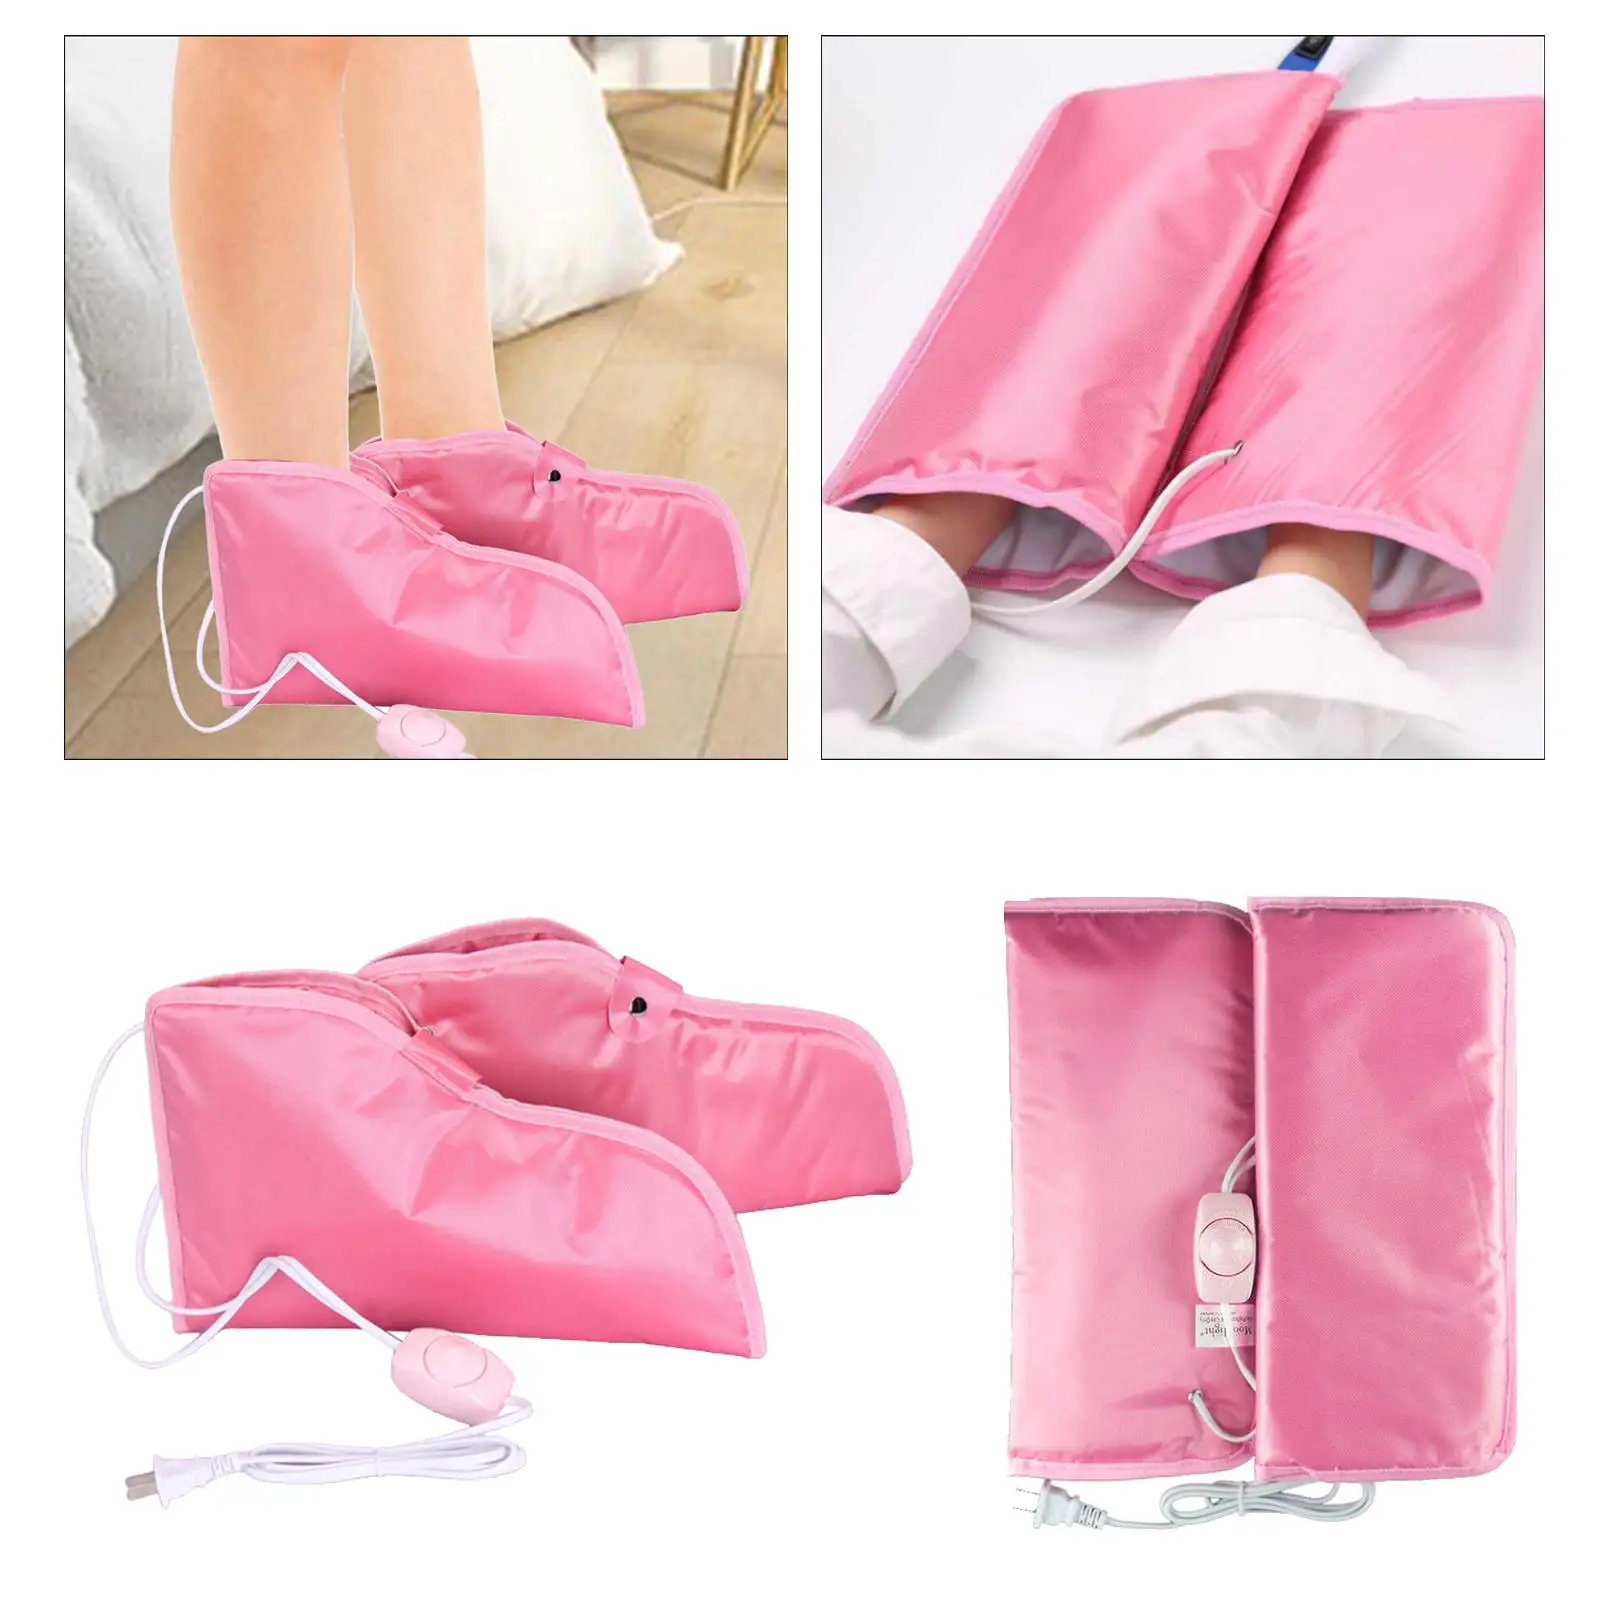 Foot Hand Mitts Paraffin Wax Heated 1 Pair Tool SPA Warmer Heated Gloves for Deep Skin Moisturize Smoothens Softens Dry Skin Men